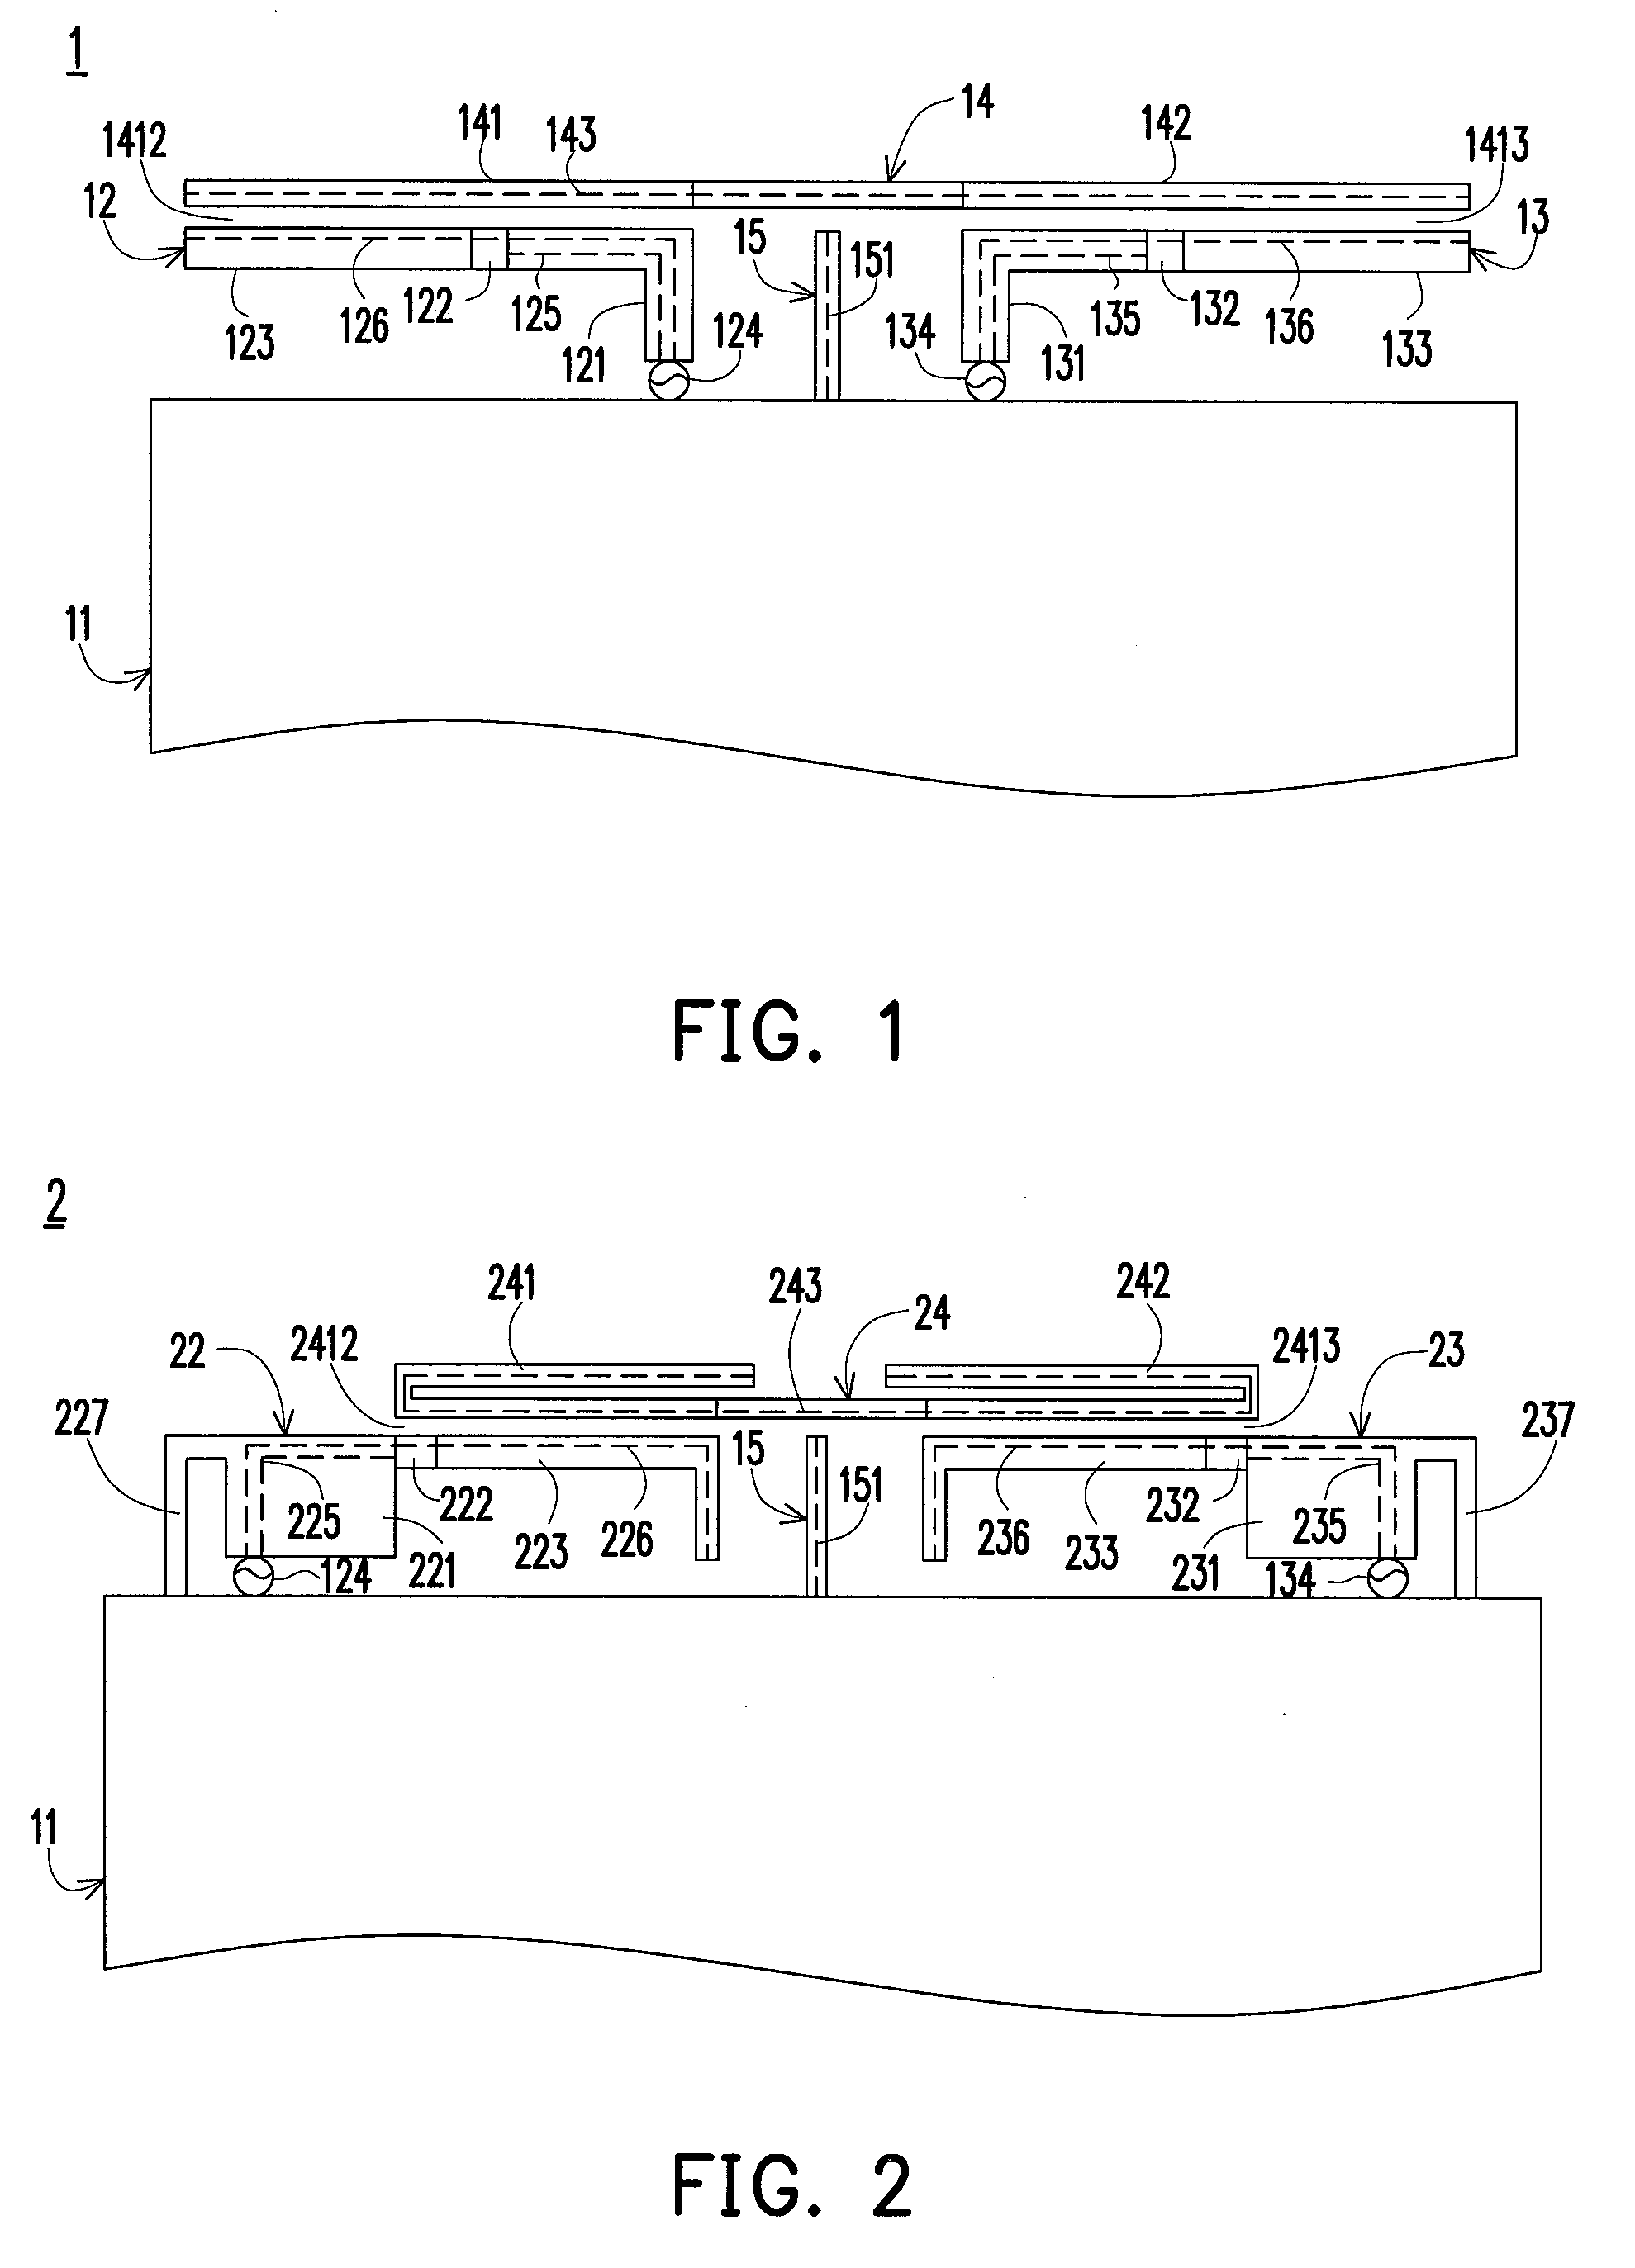 Multi-band multi-antenna system and communiction device thereof